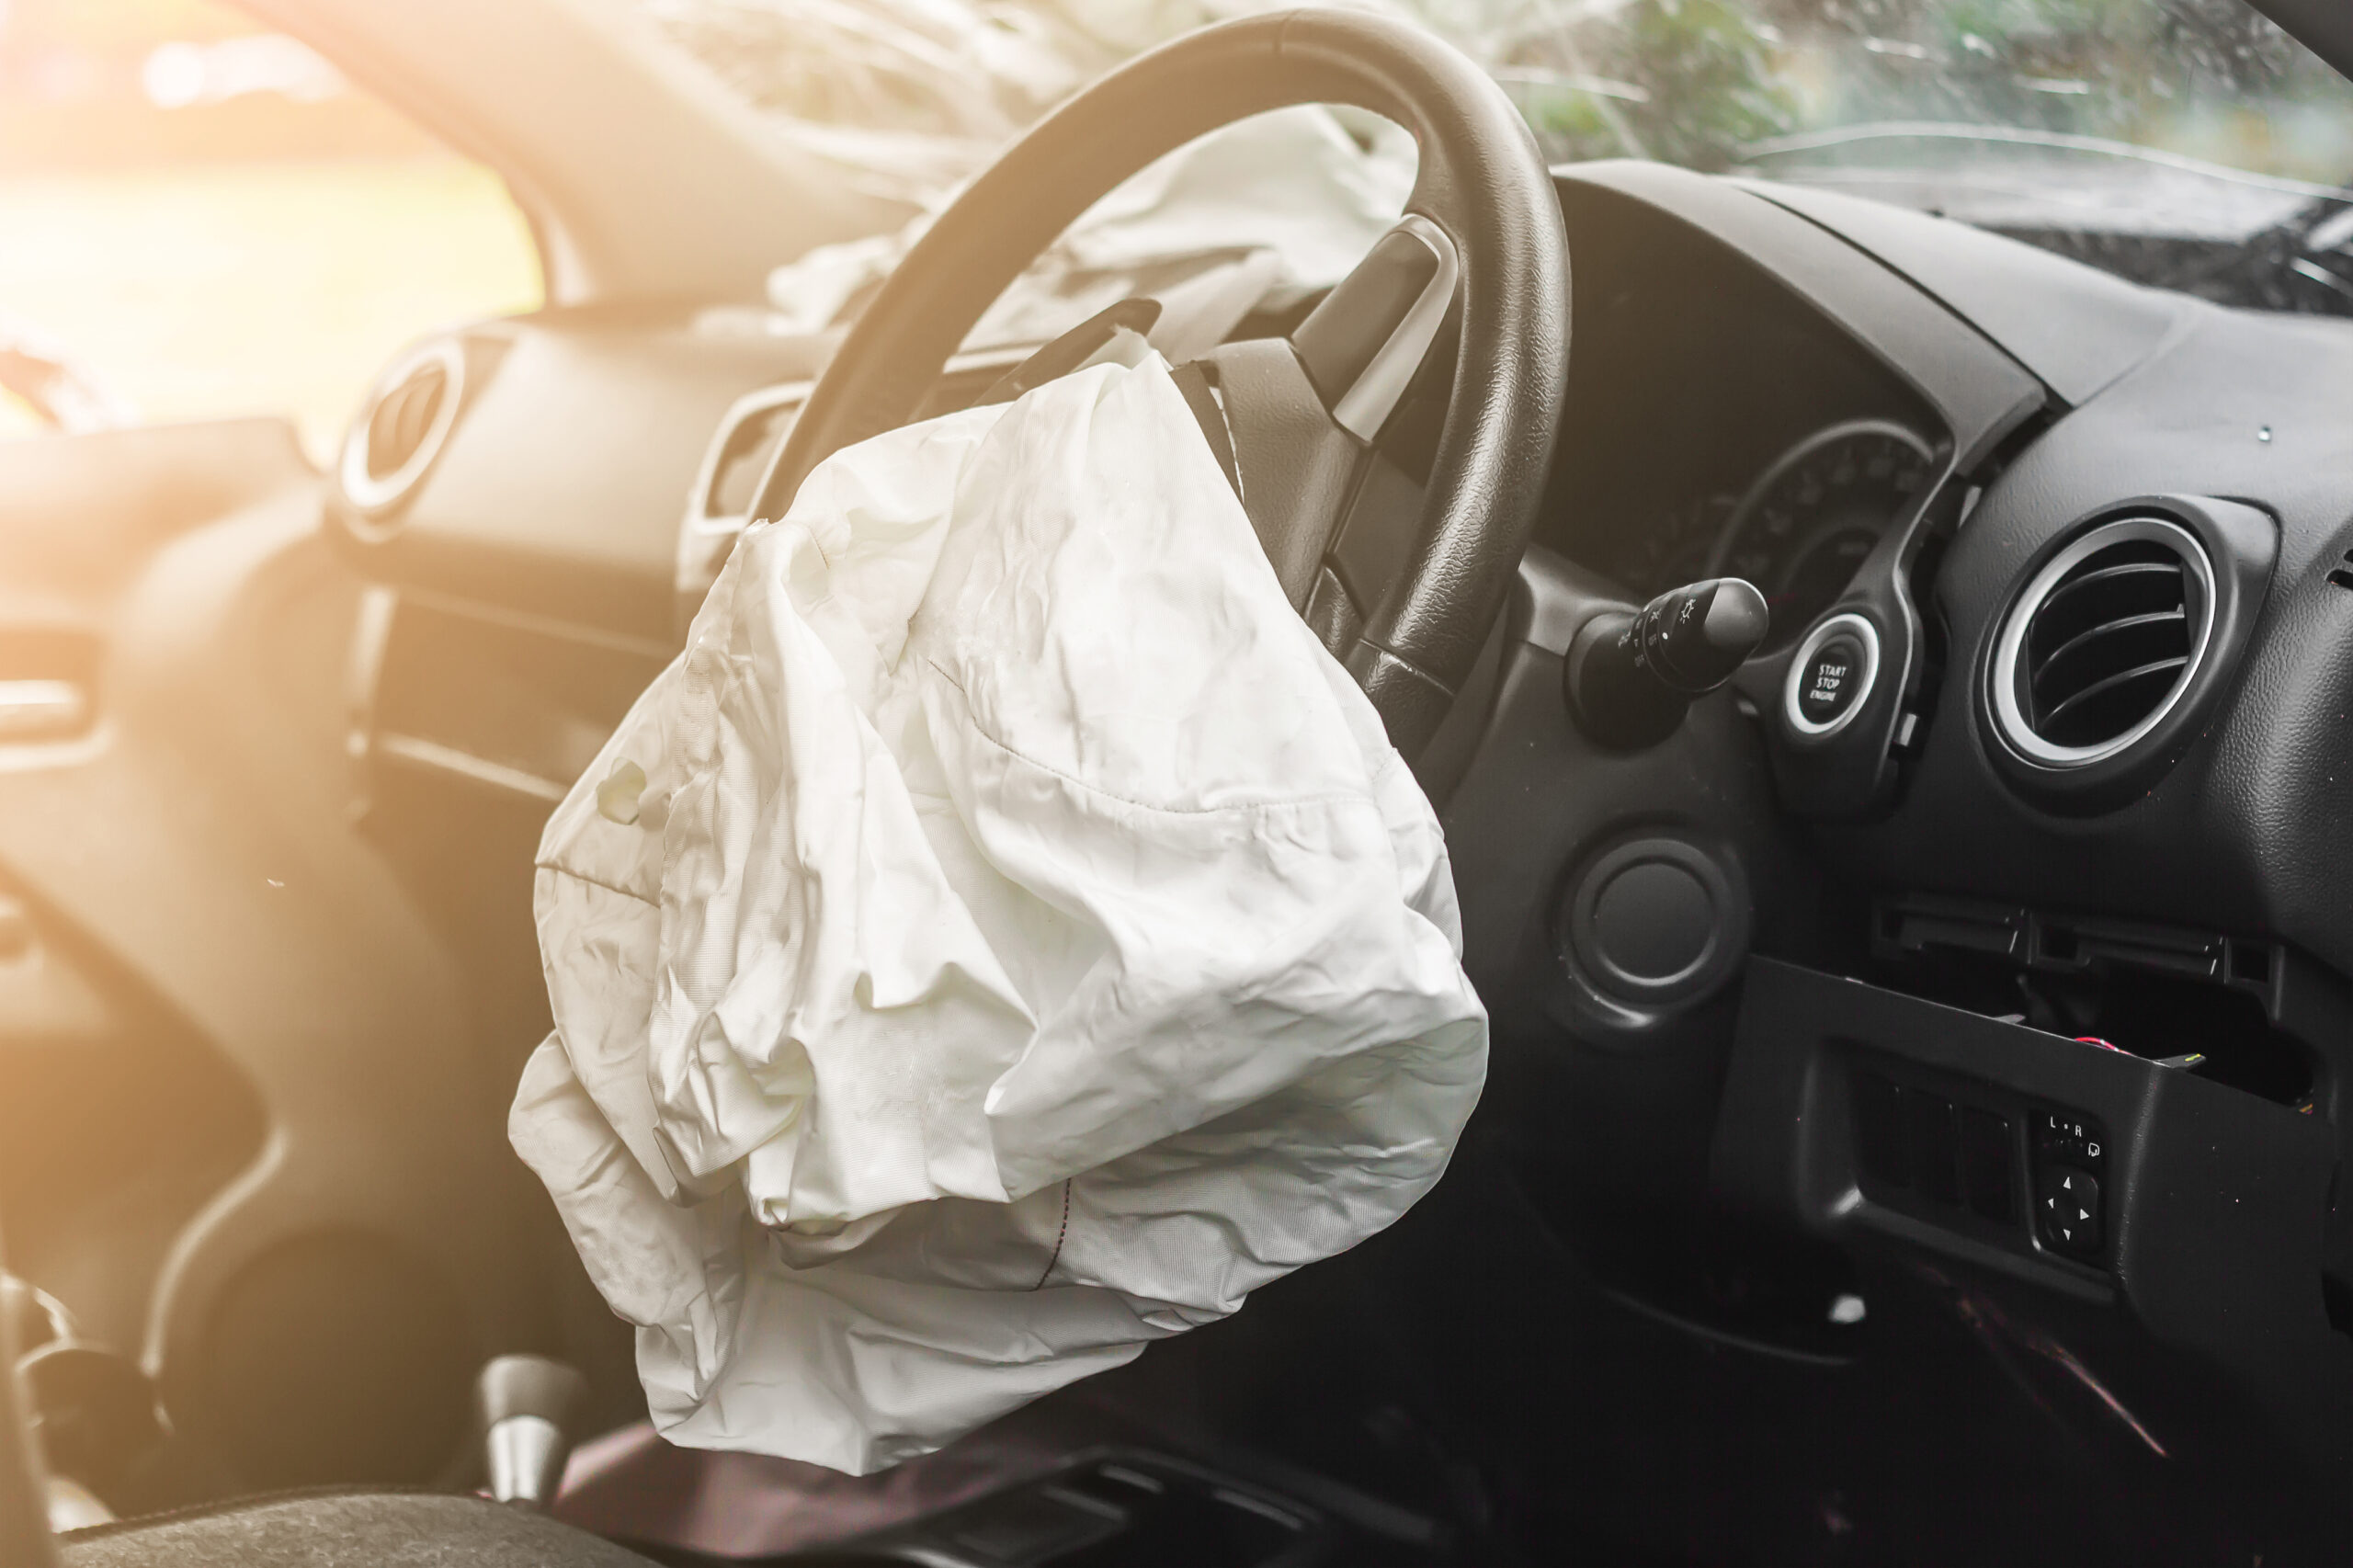 An airbag has exploded inside a car on the drivers' side